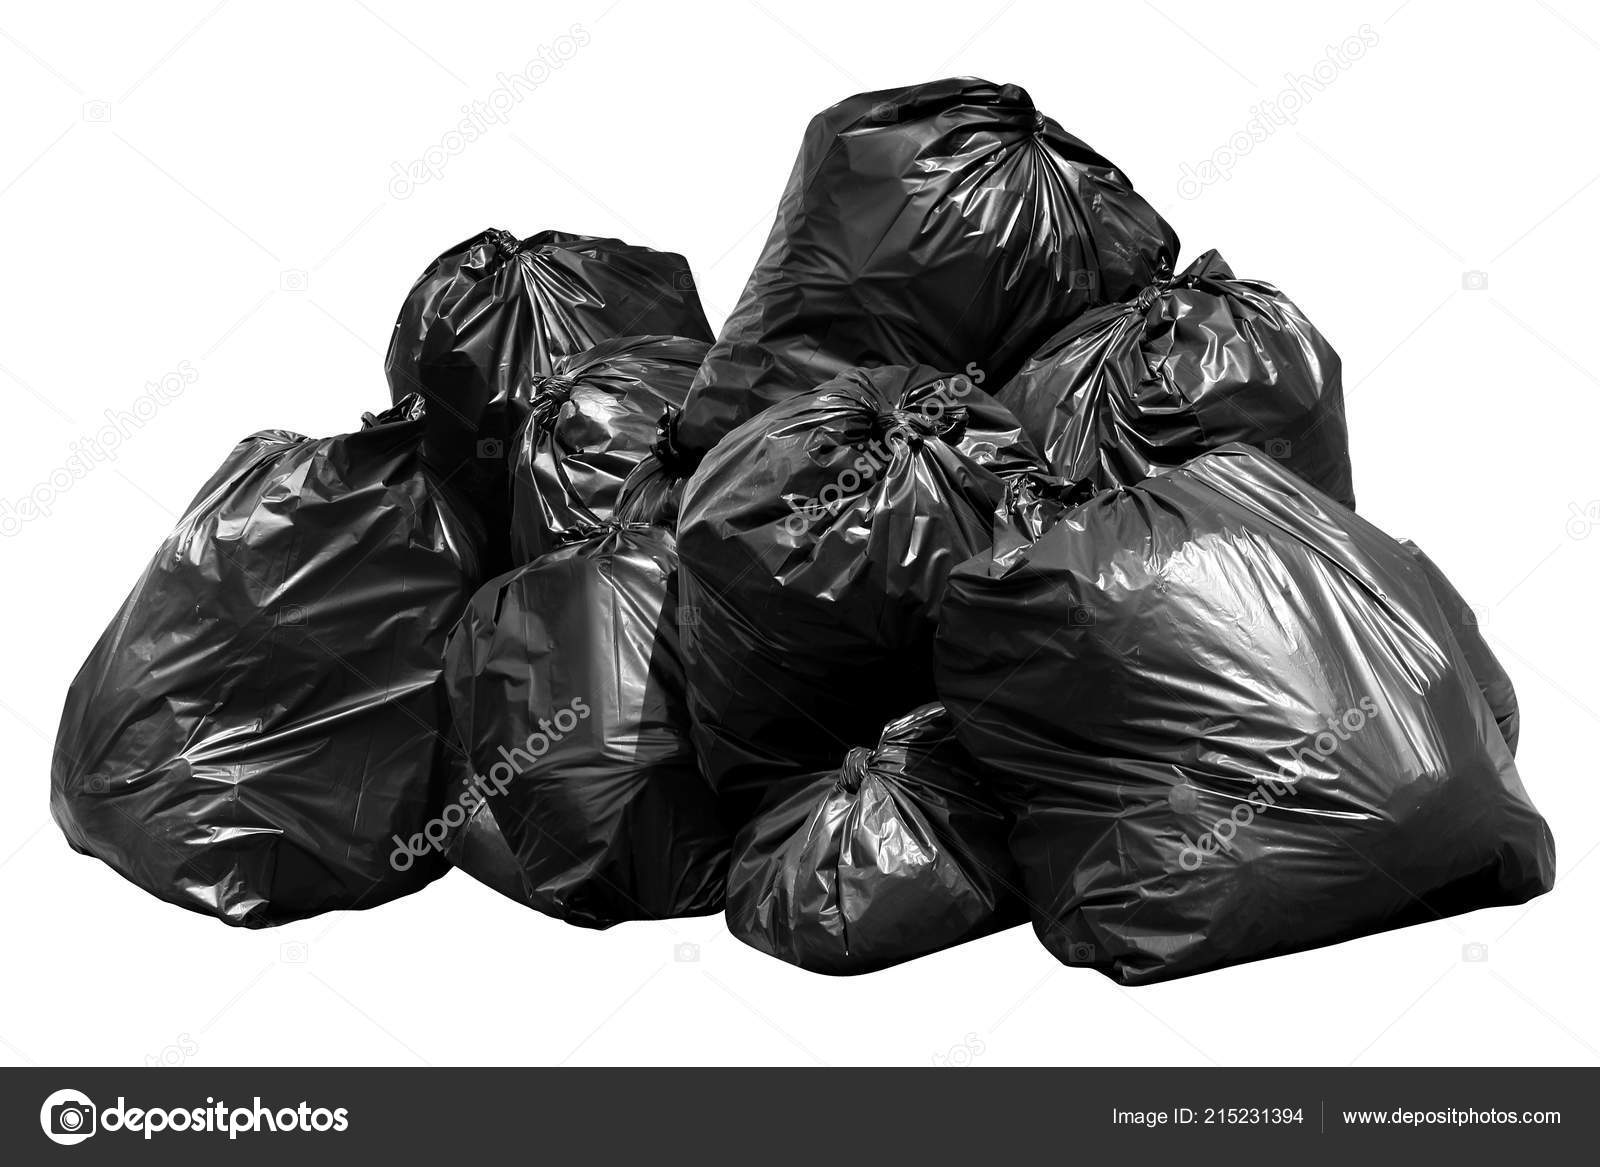 waste, black garbage bags plastic pile stack isolated on white